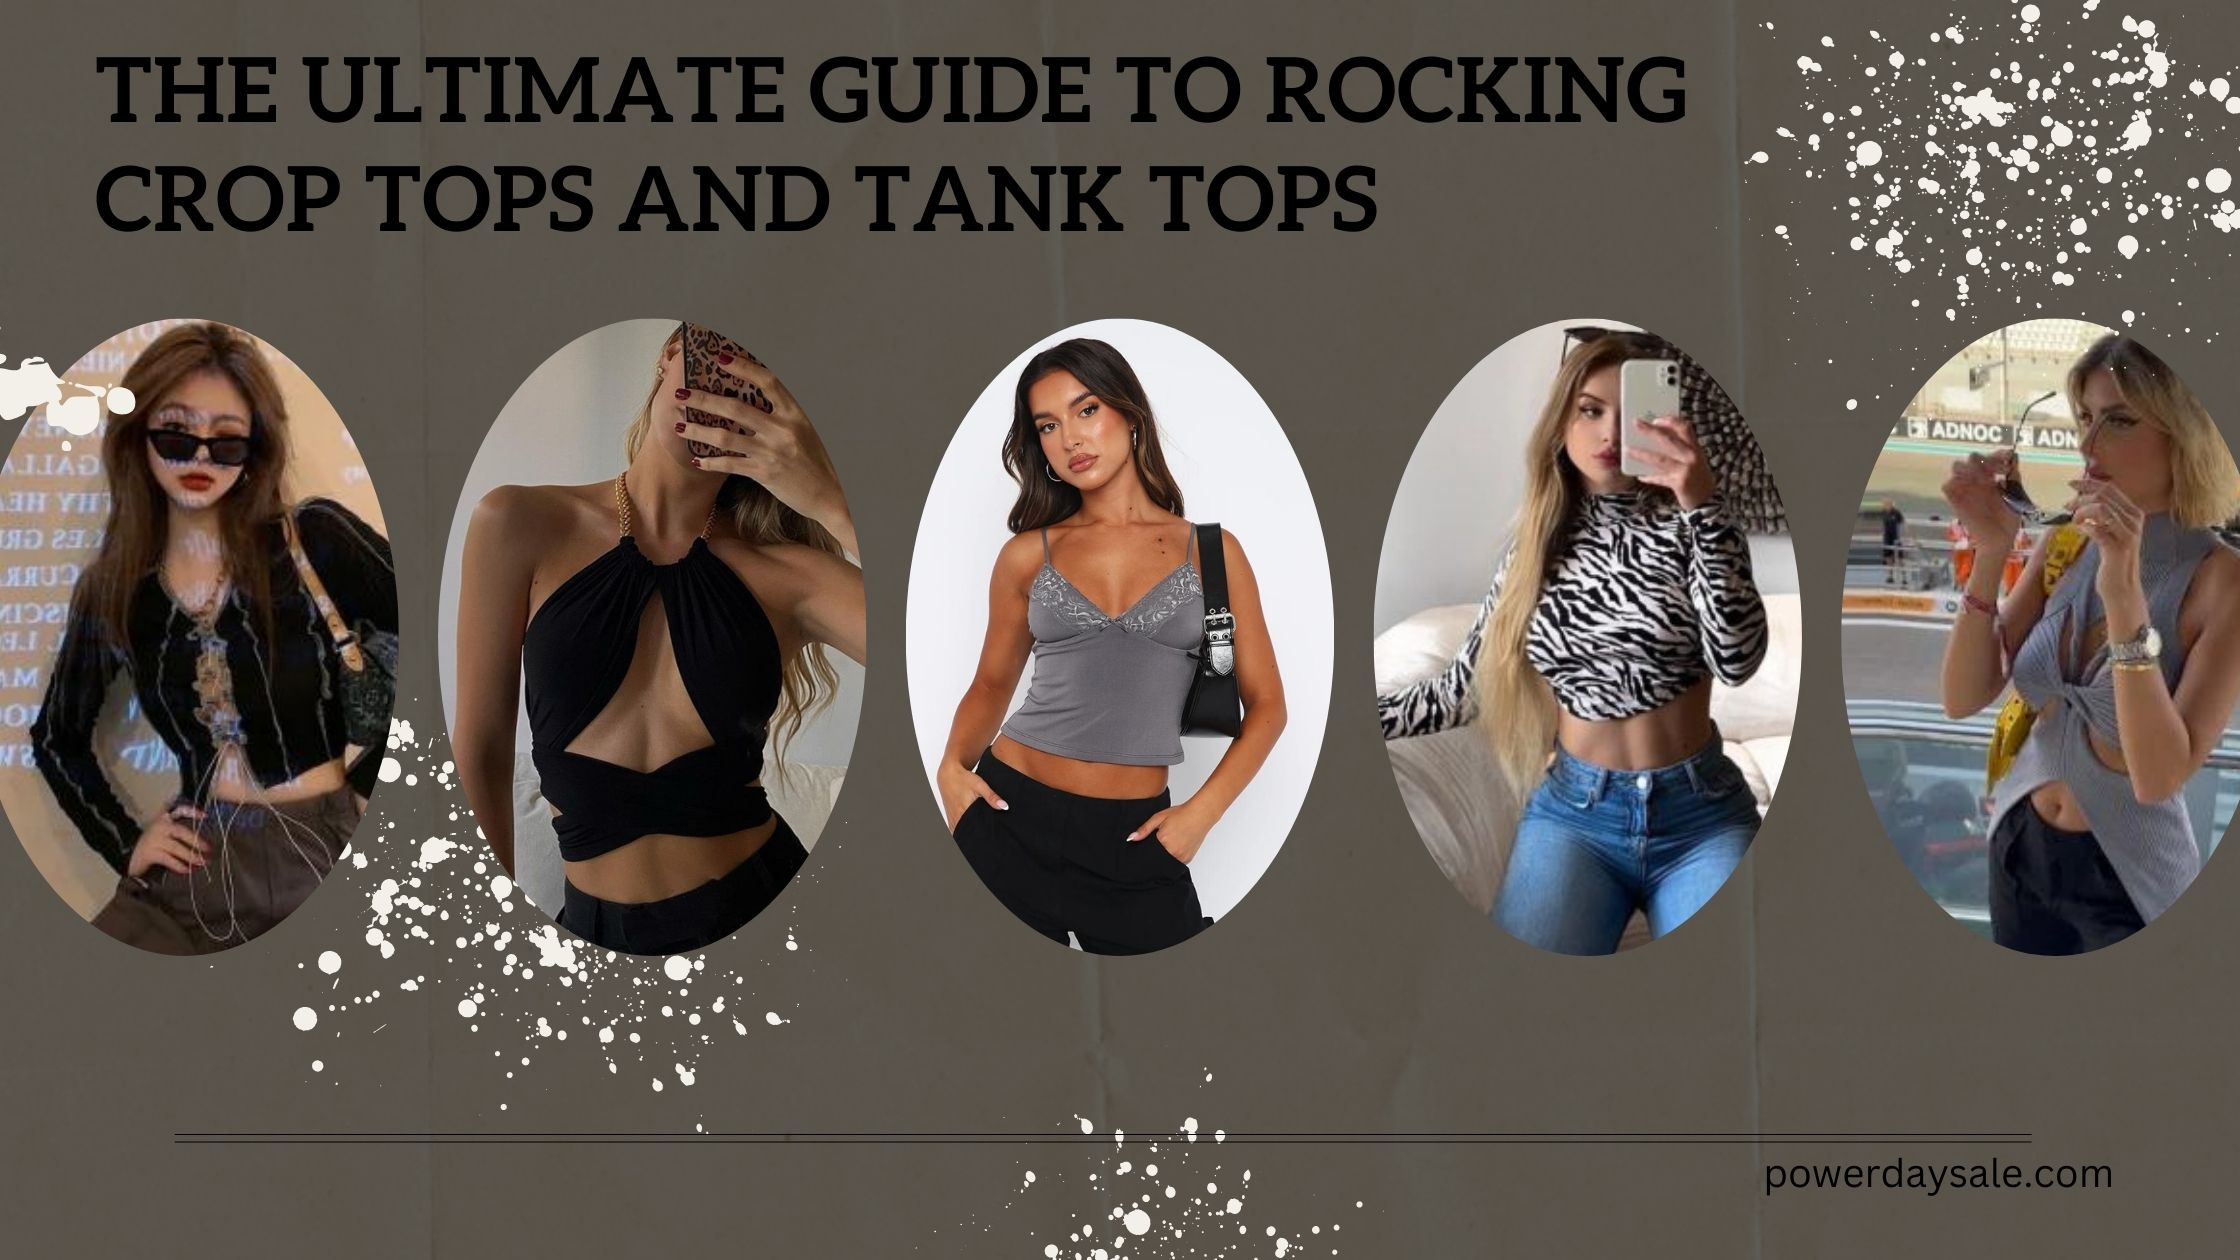 You are currently viewing The Ultimate Guide to Rocking Crop Tops and Tank Tops